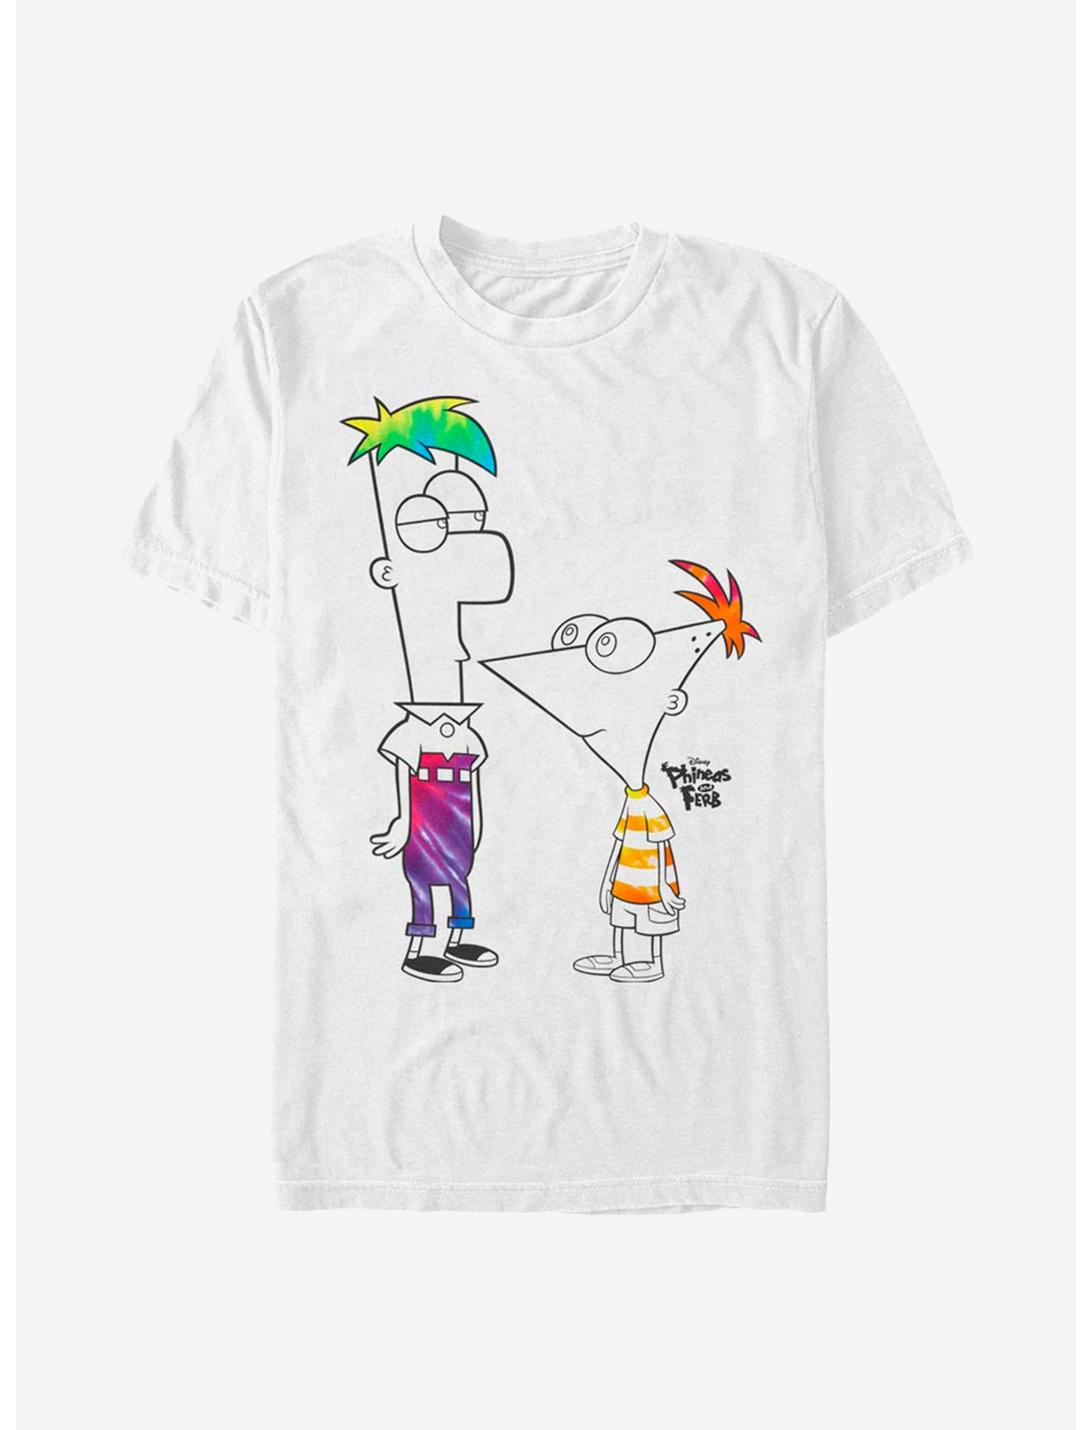 Disney Phineas And Ferb Boys Of Tie Dye T-Shirt, WHITE, hi-res